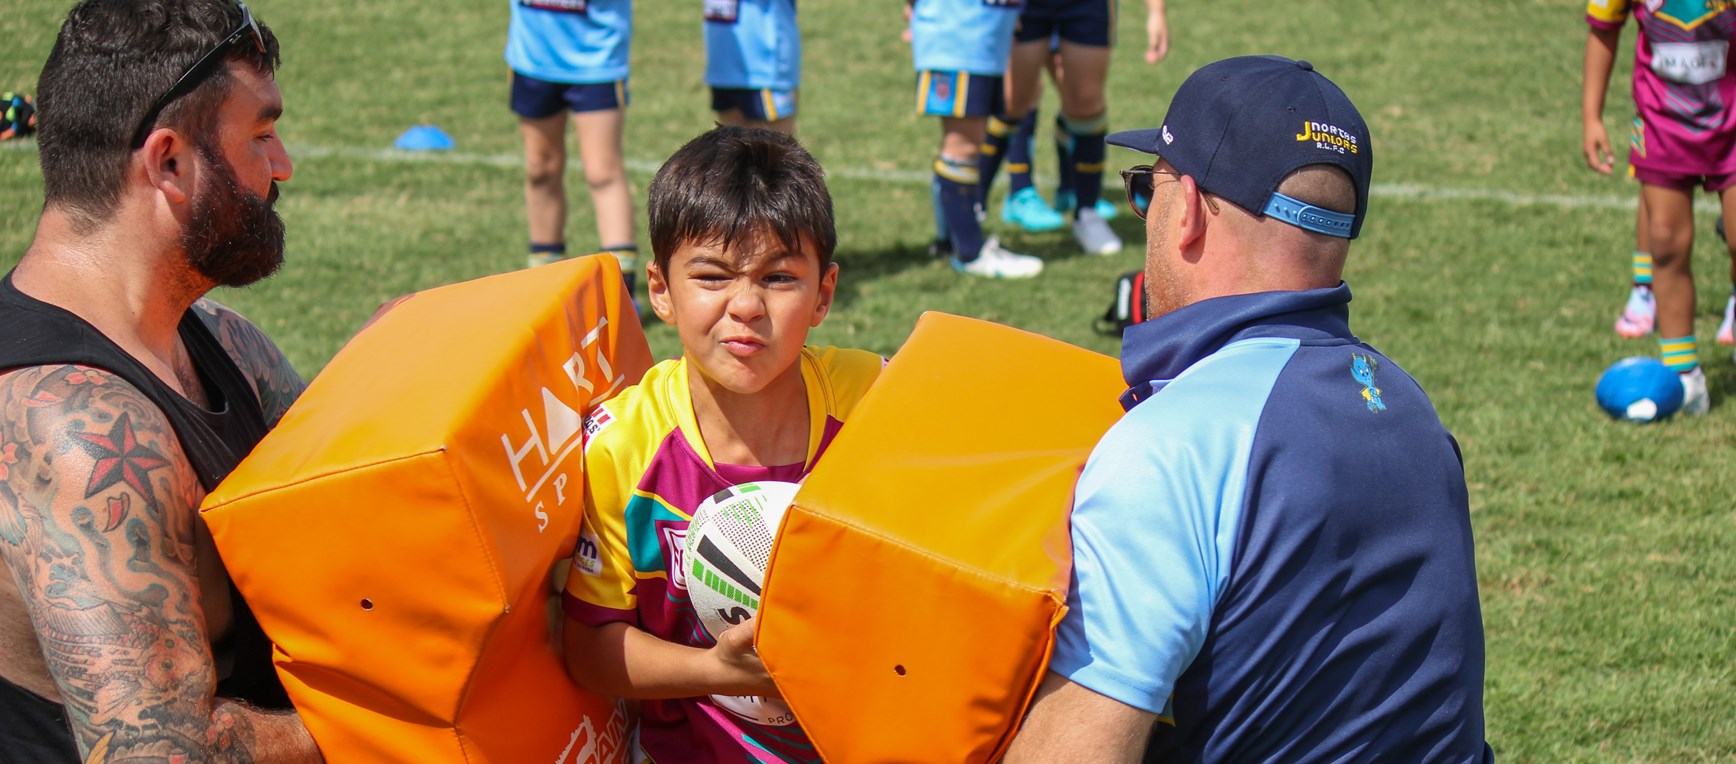 In pictures: Tackle Ready Under 7 gala day